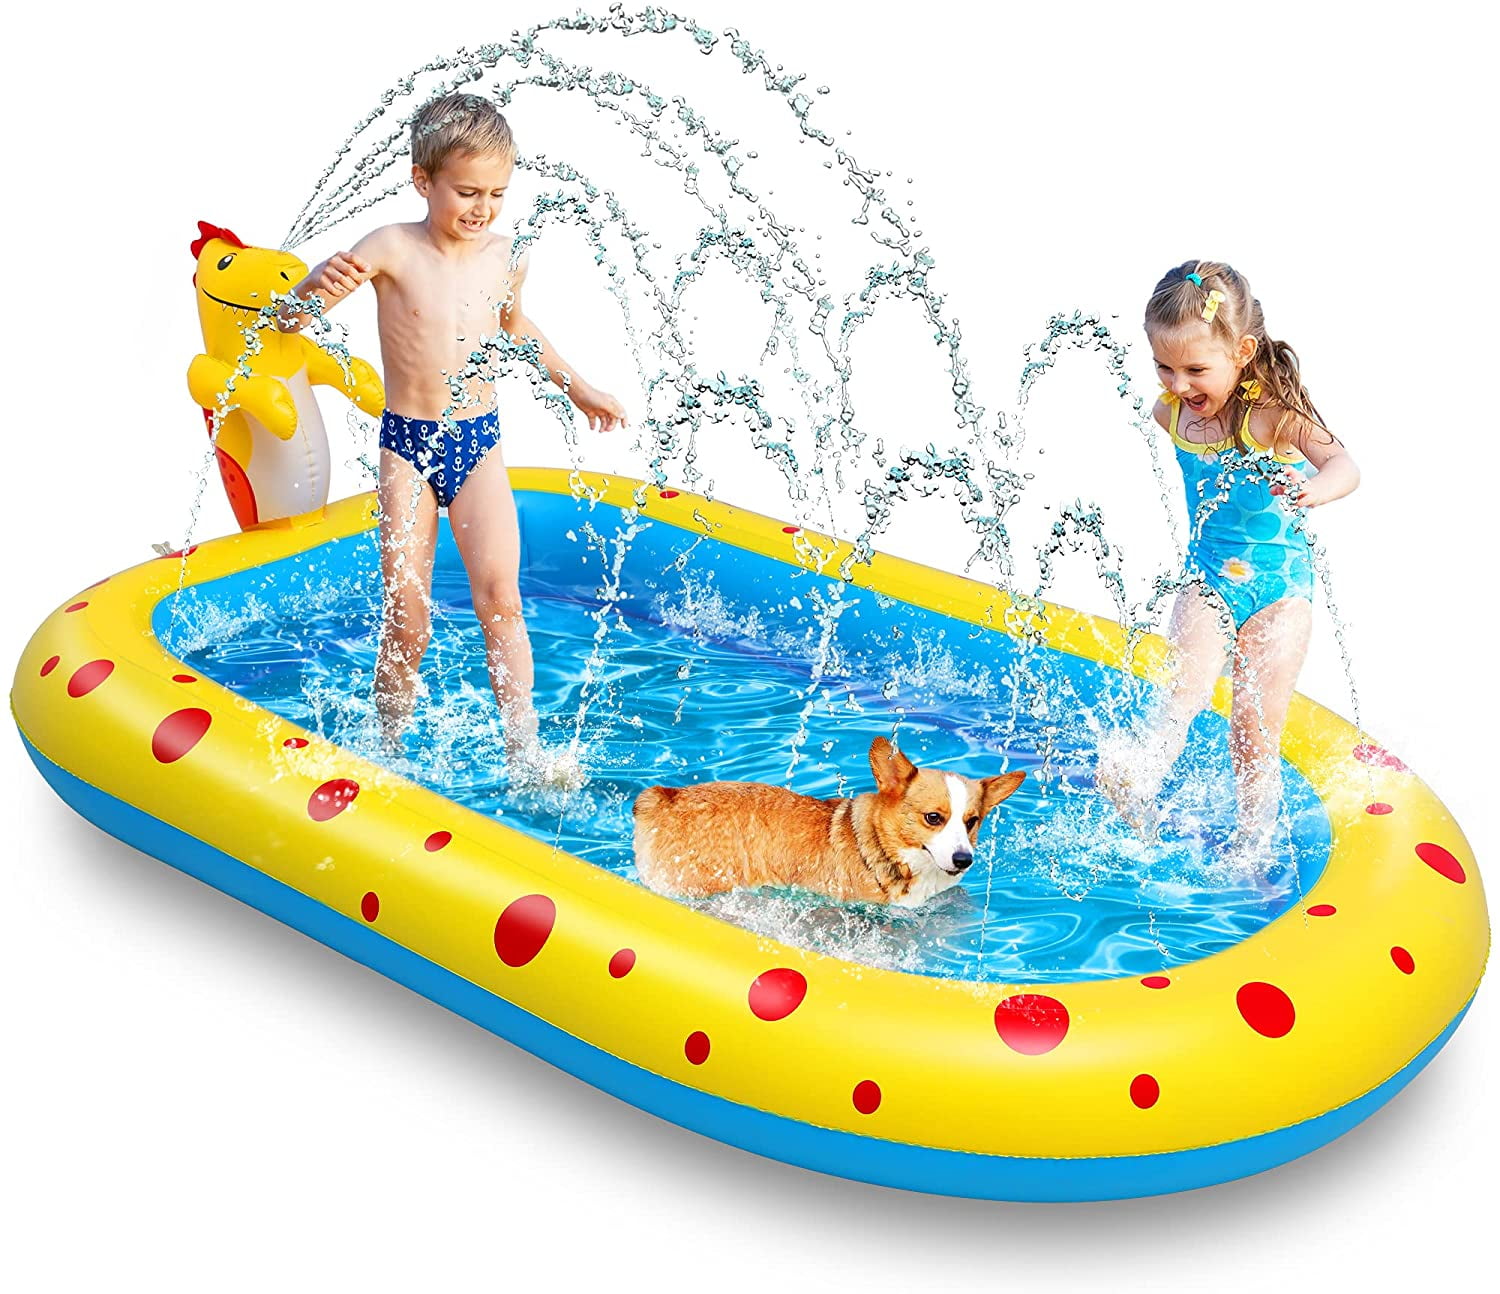 2021 Home Swimming Pool Children Inflatable Baby Bath Dry Pool Play 